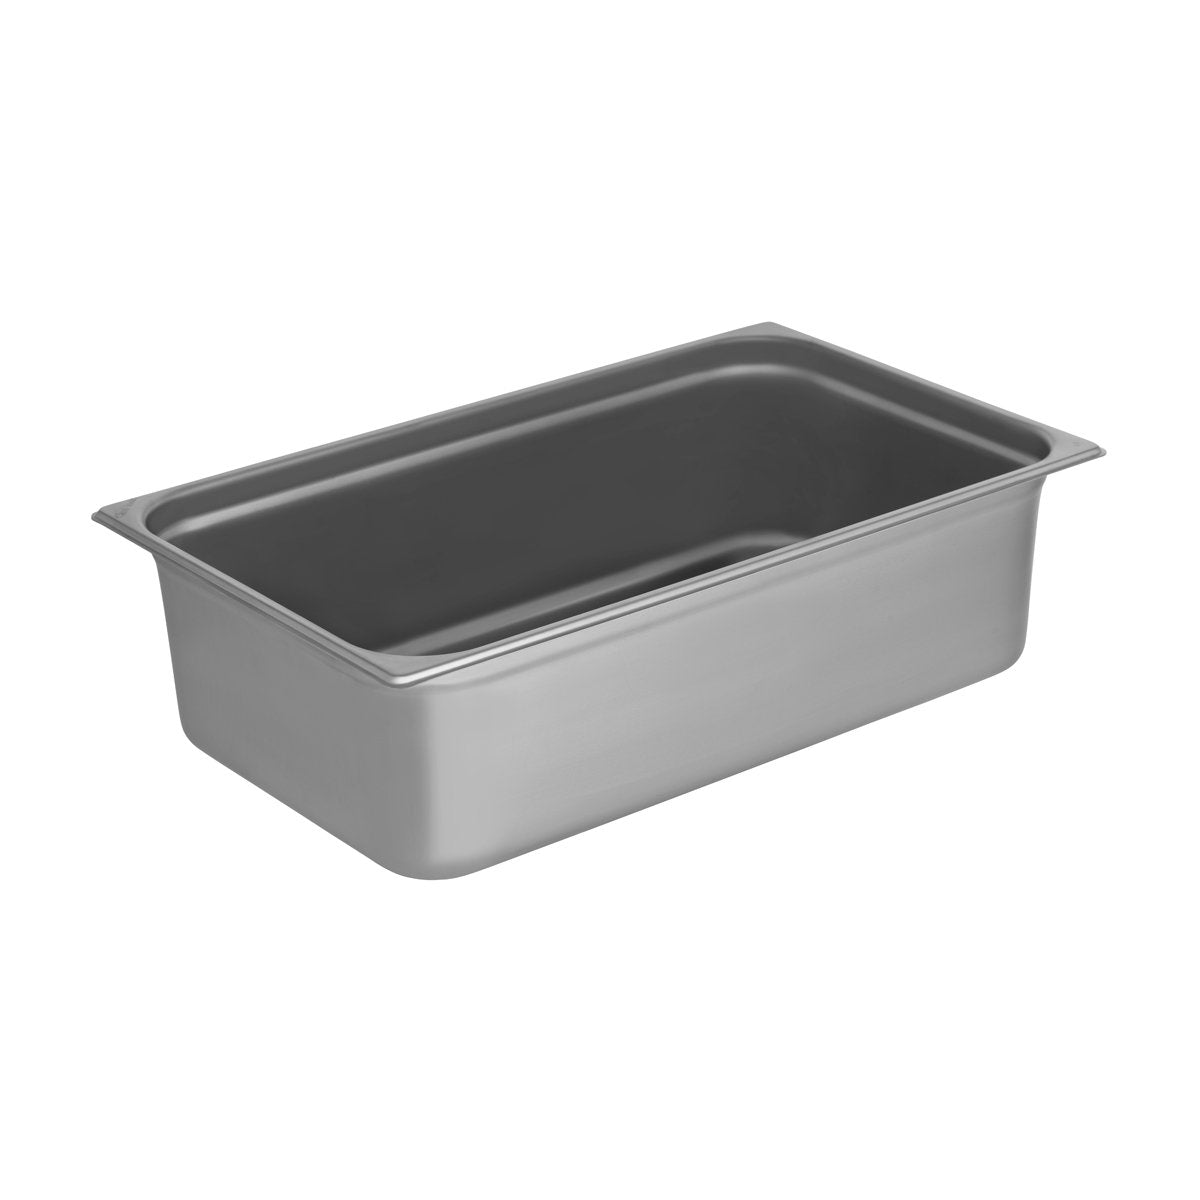 GN-11150 Chef Inox Gastronorm Pan 1/1 Size 150mm Tomkin Australia Hospitality Supplies